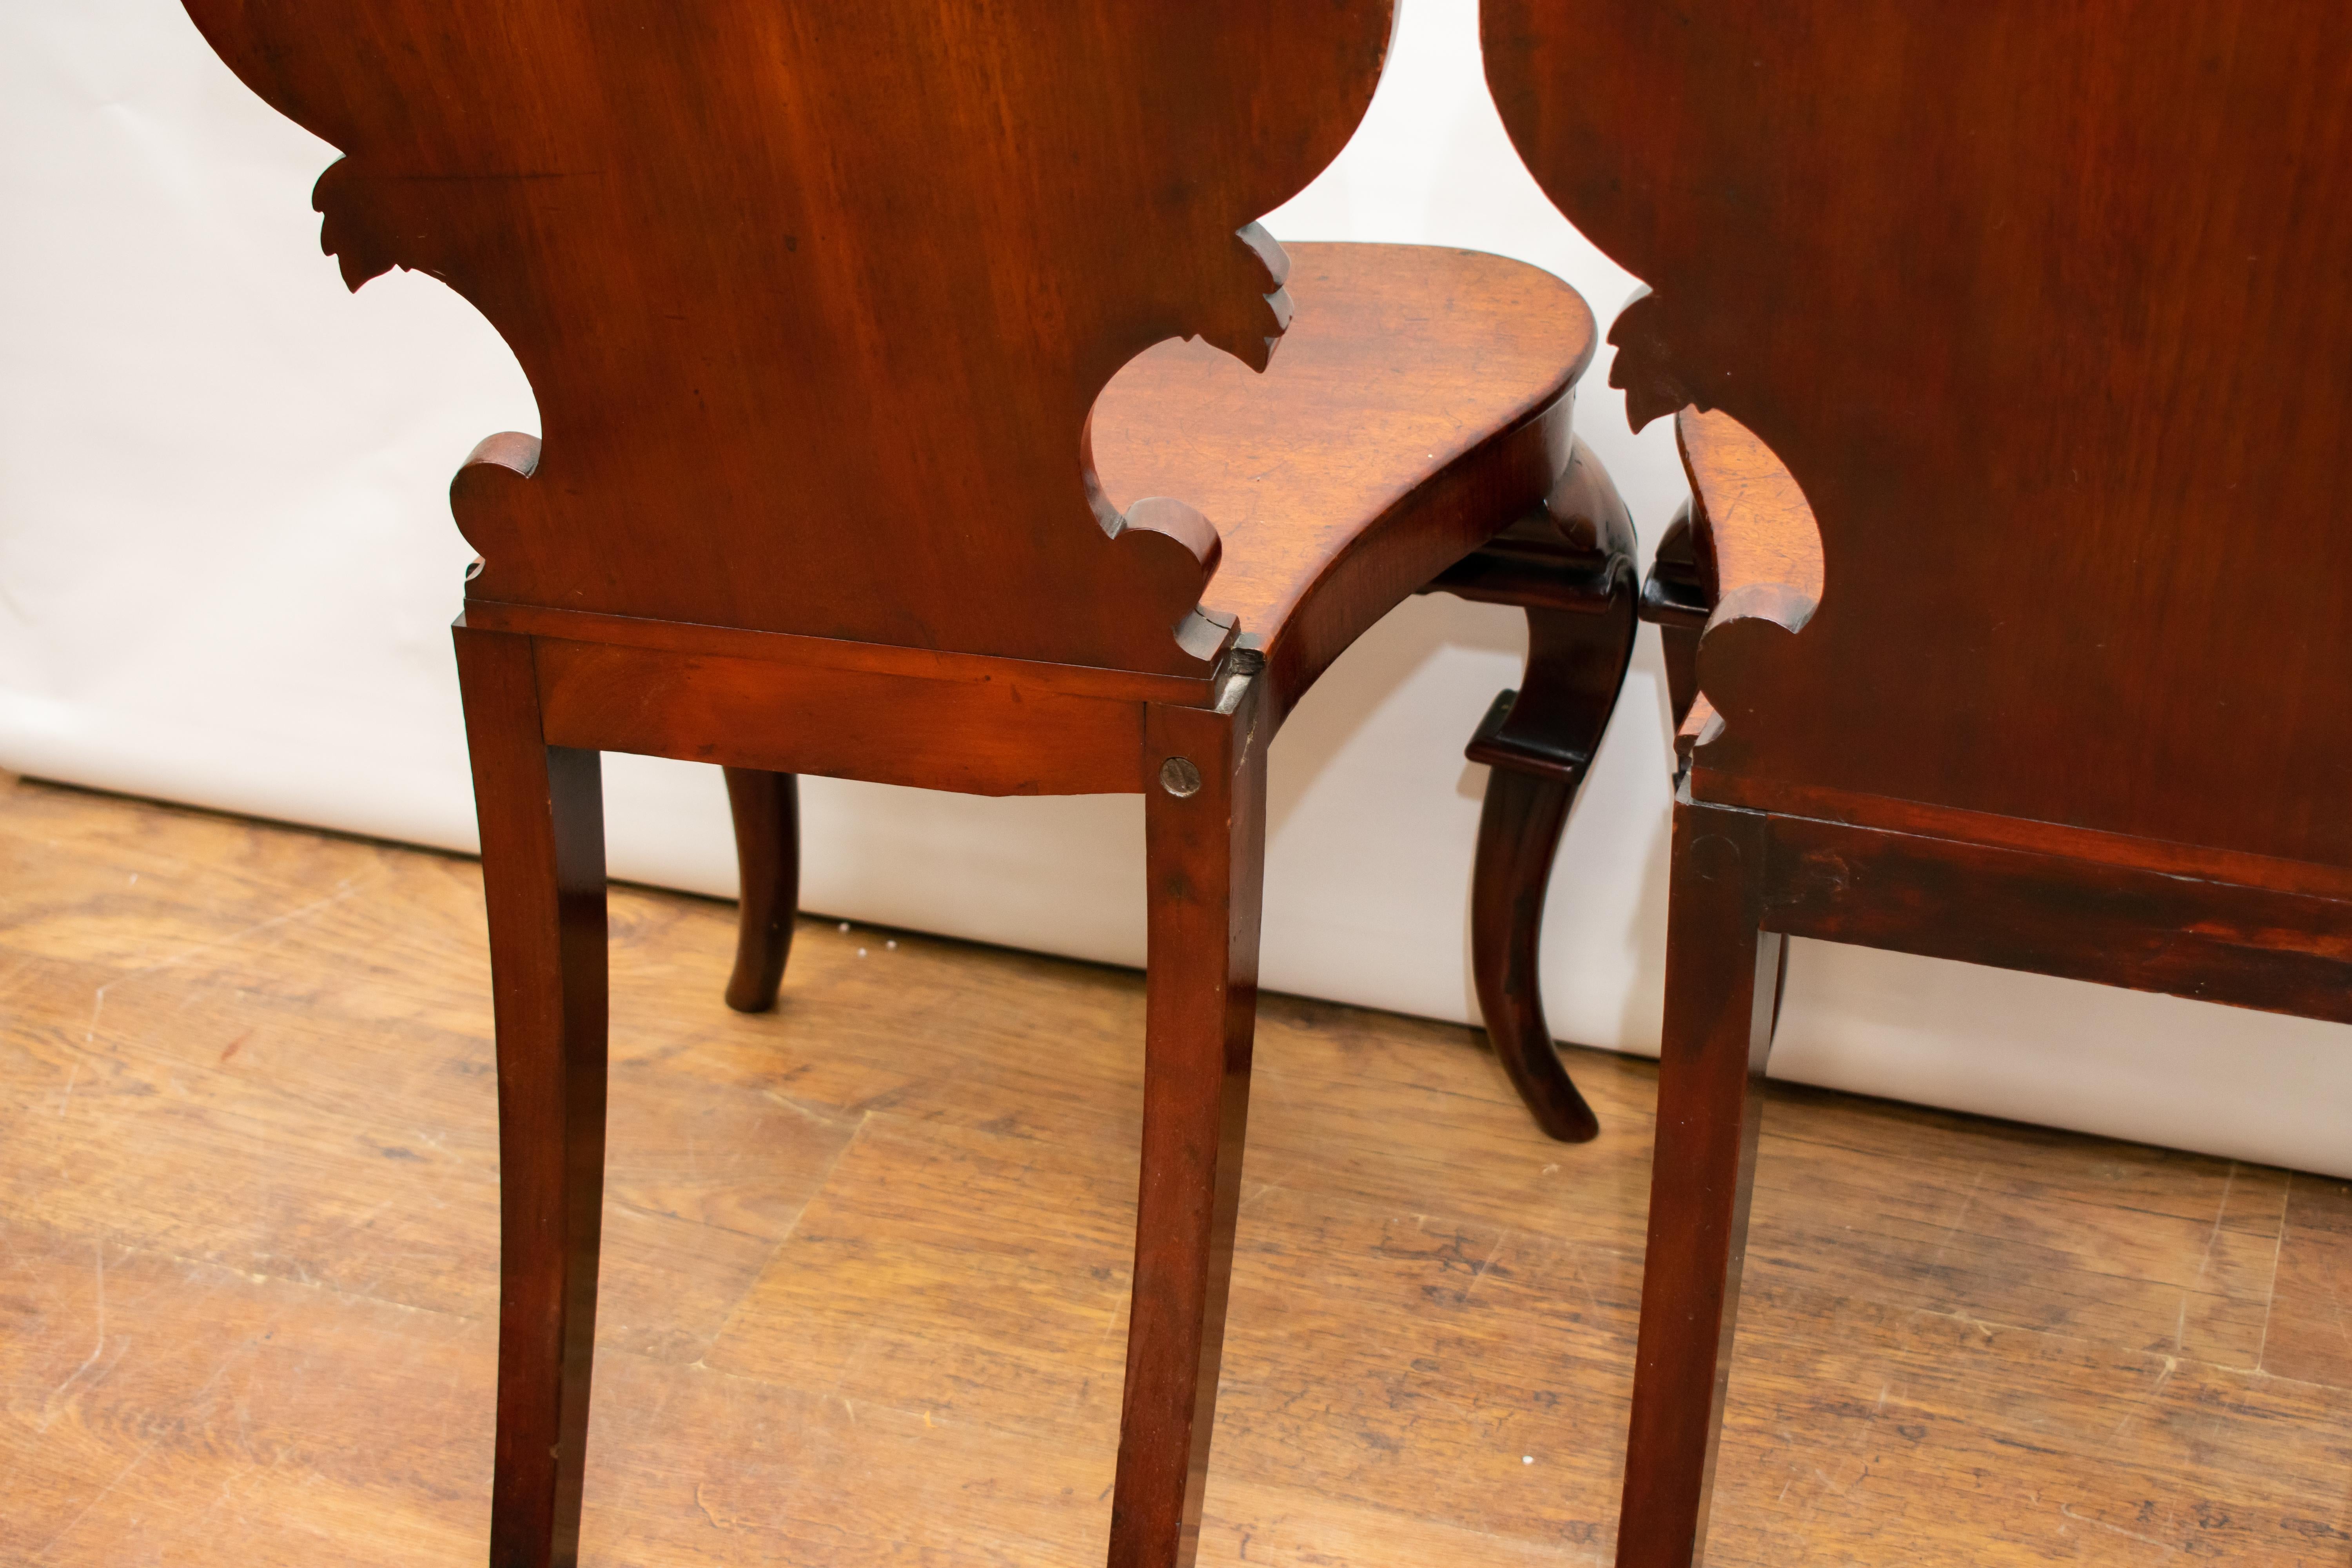 - Gorgeous pair of Victorian hall chairs
- Hand carved and in mahogany, circa 1840 
- Great collectors pair
- Offered in great shape, ready for home use right away
- Will ship to anywhere in the world.

 